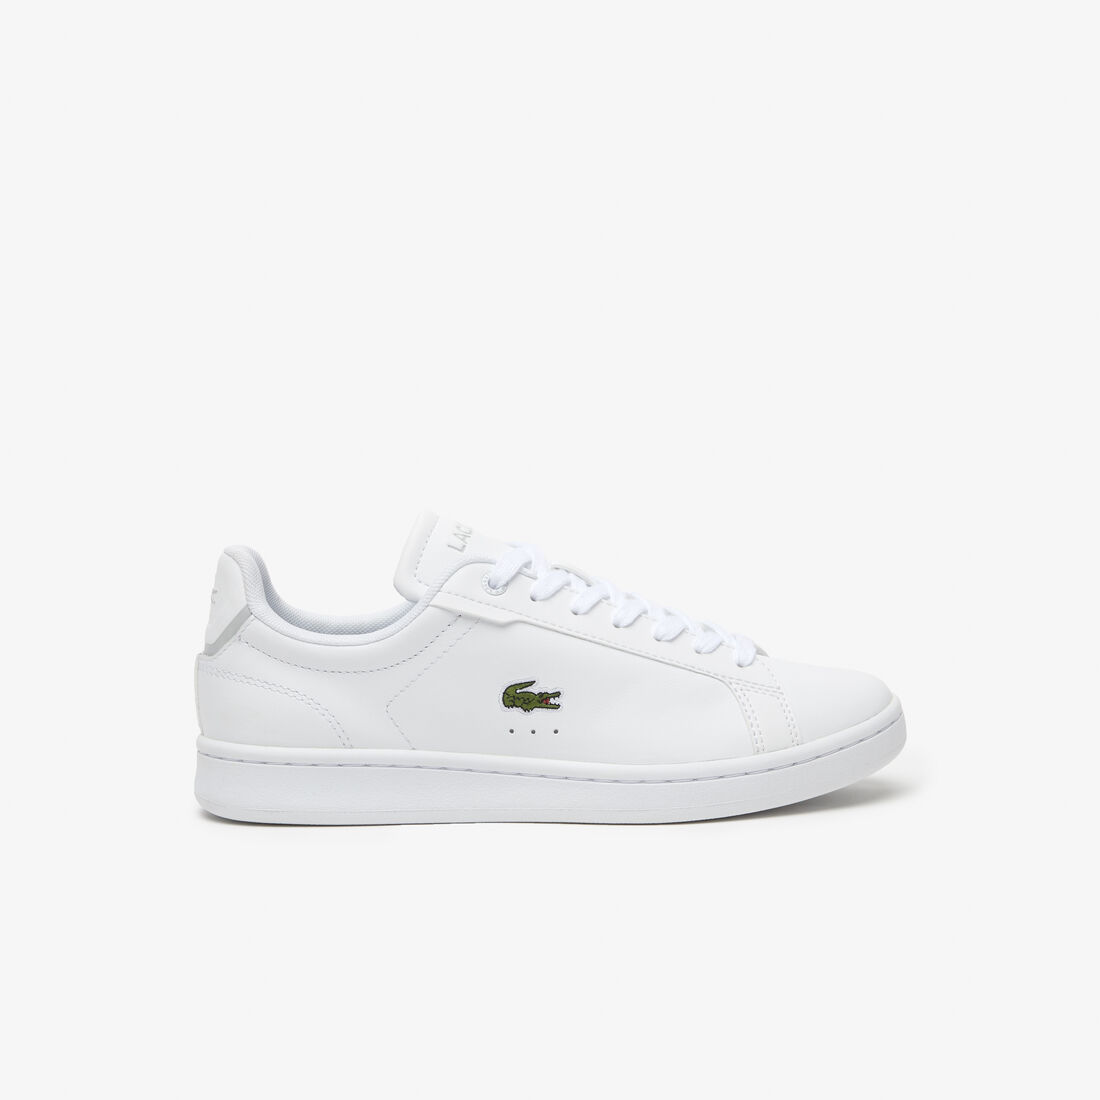 Lacoste Carnaby Pro Bl Tonal Leather Women's Sneakers White | 149-GWRIDO